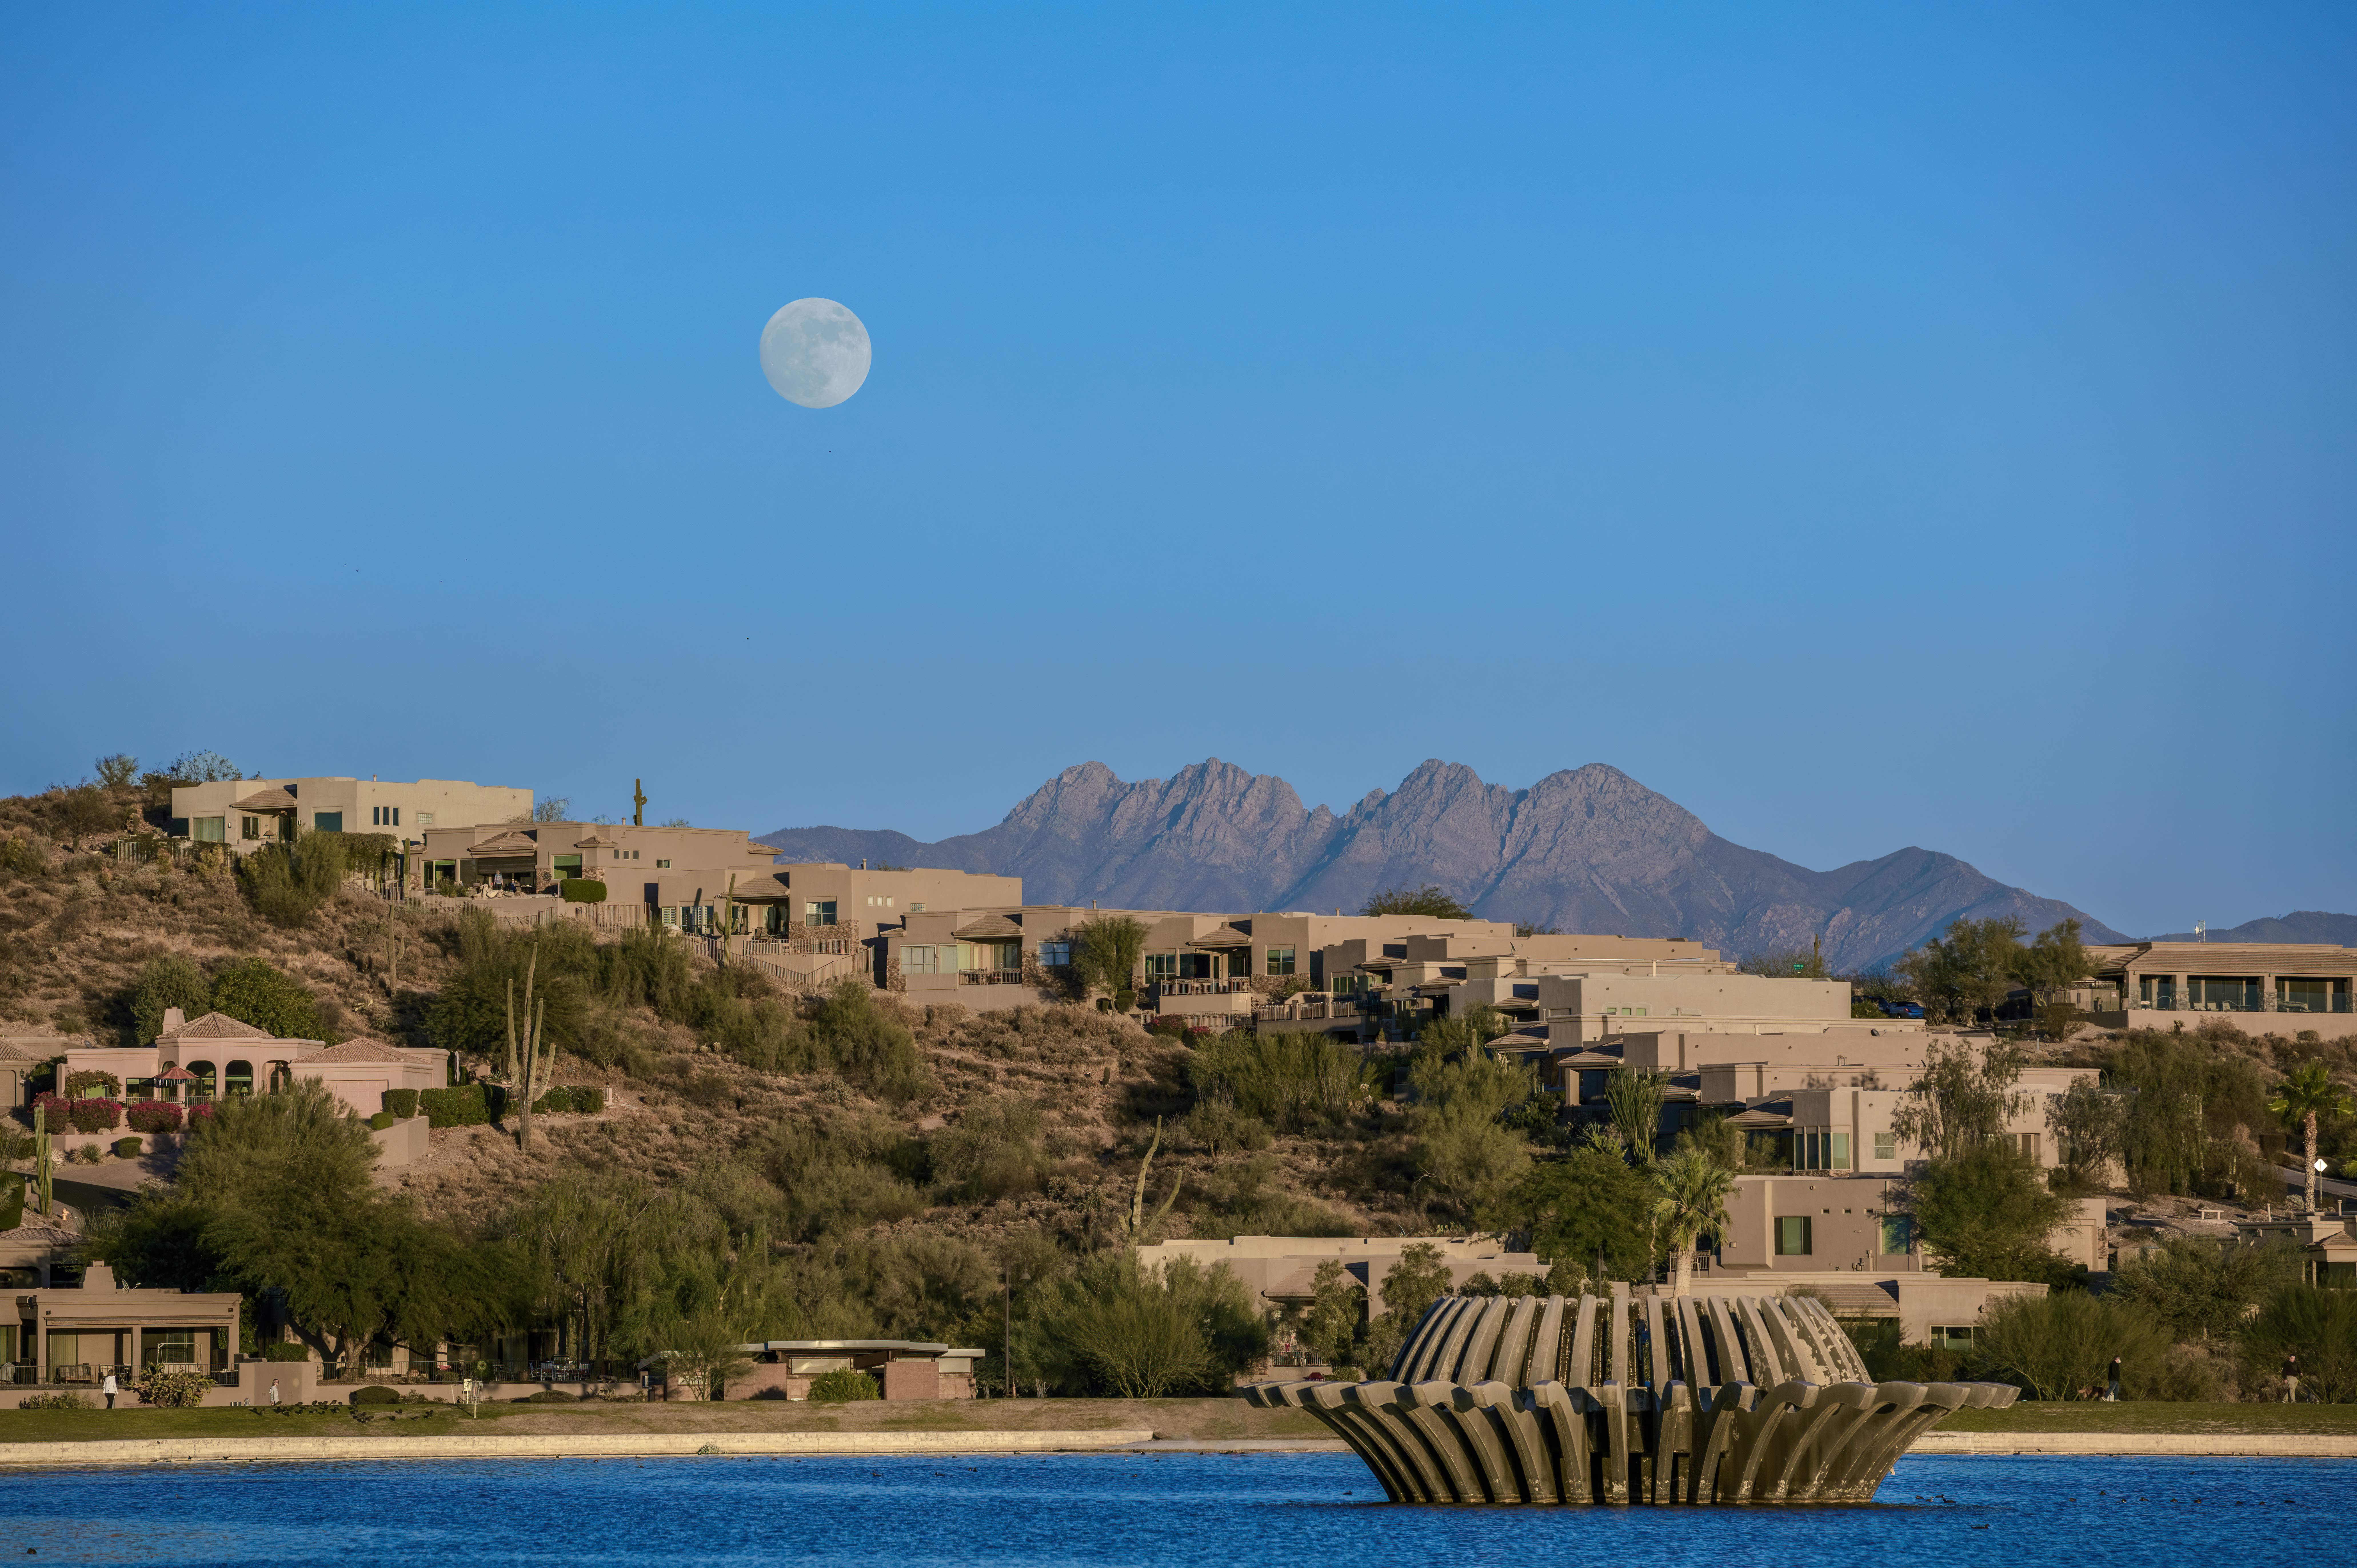 Moon and Four Peaks at Fountain Park